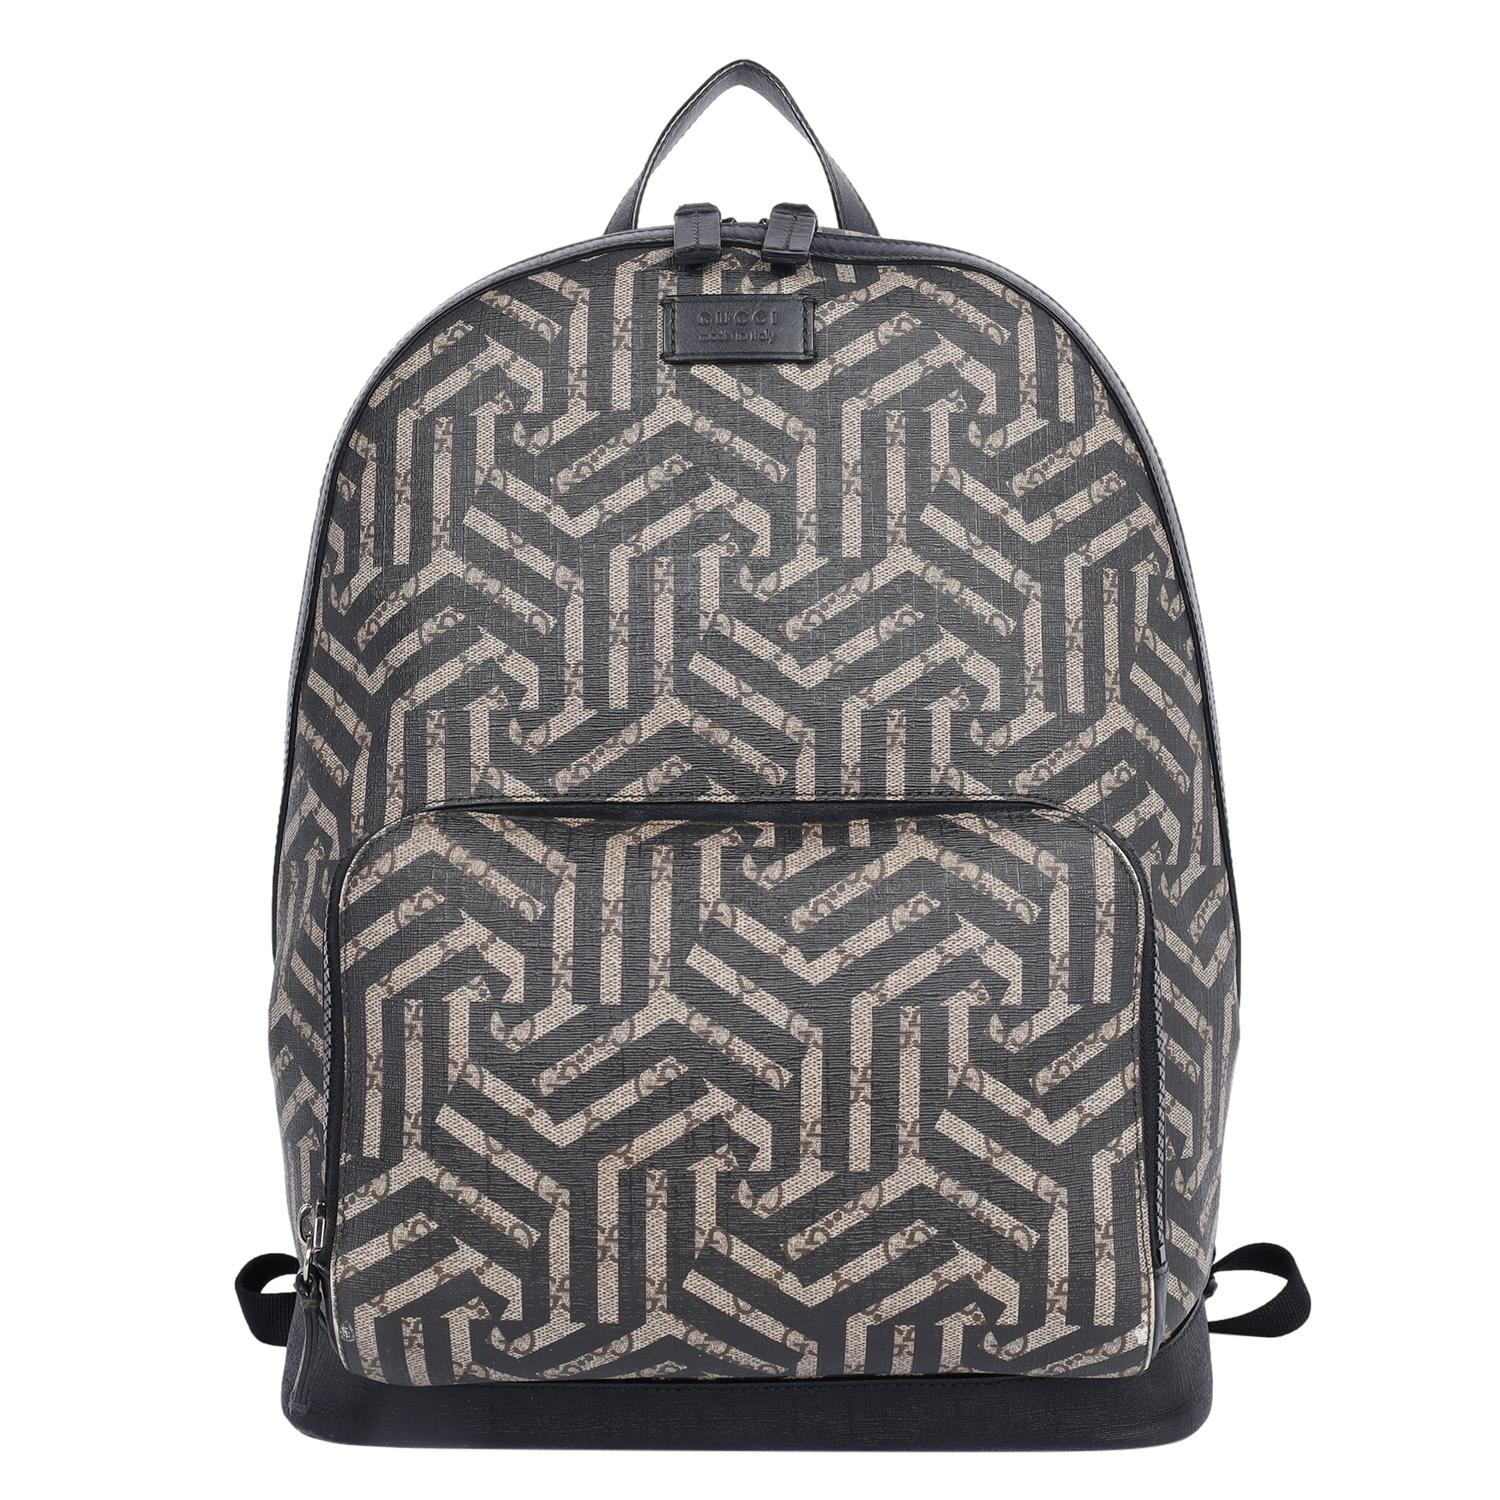 Gucci GG Supreme Monogram Caleido Backpack in Black For Sale 5